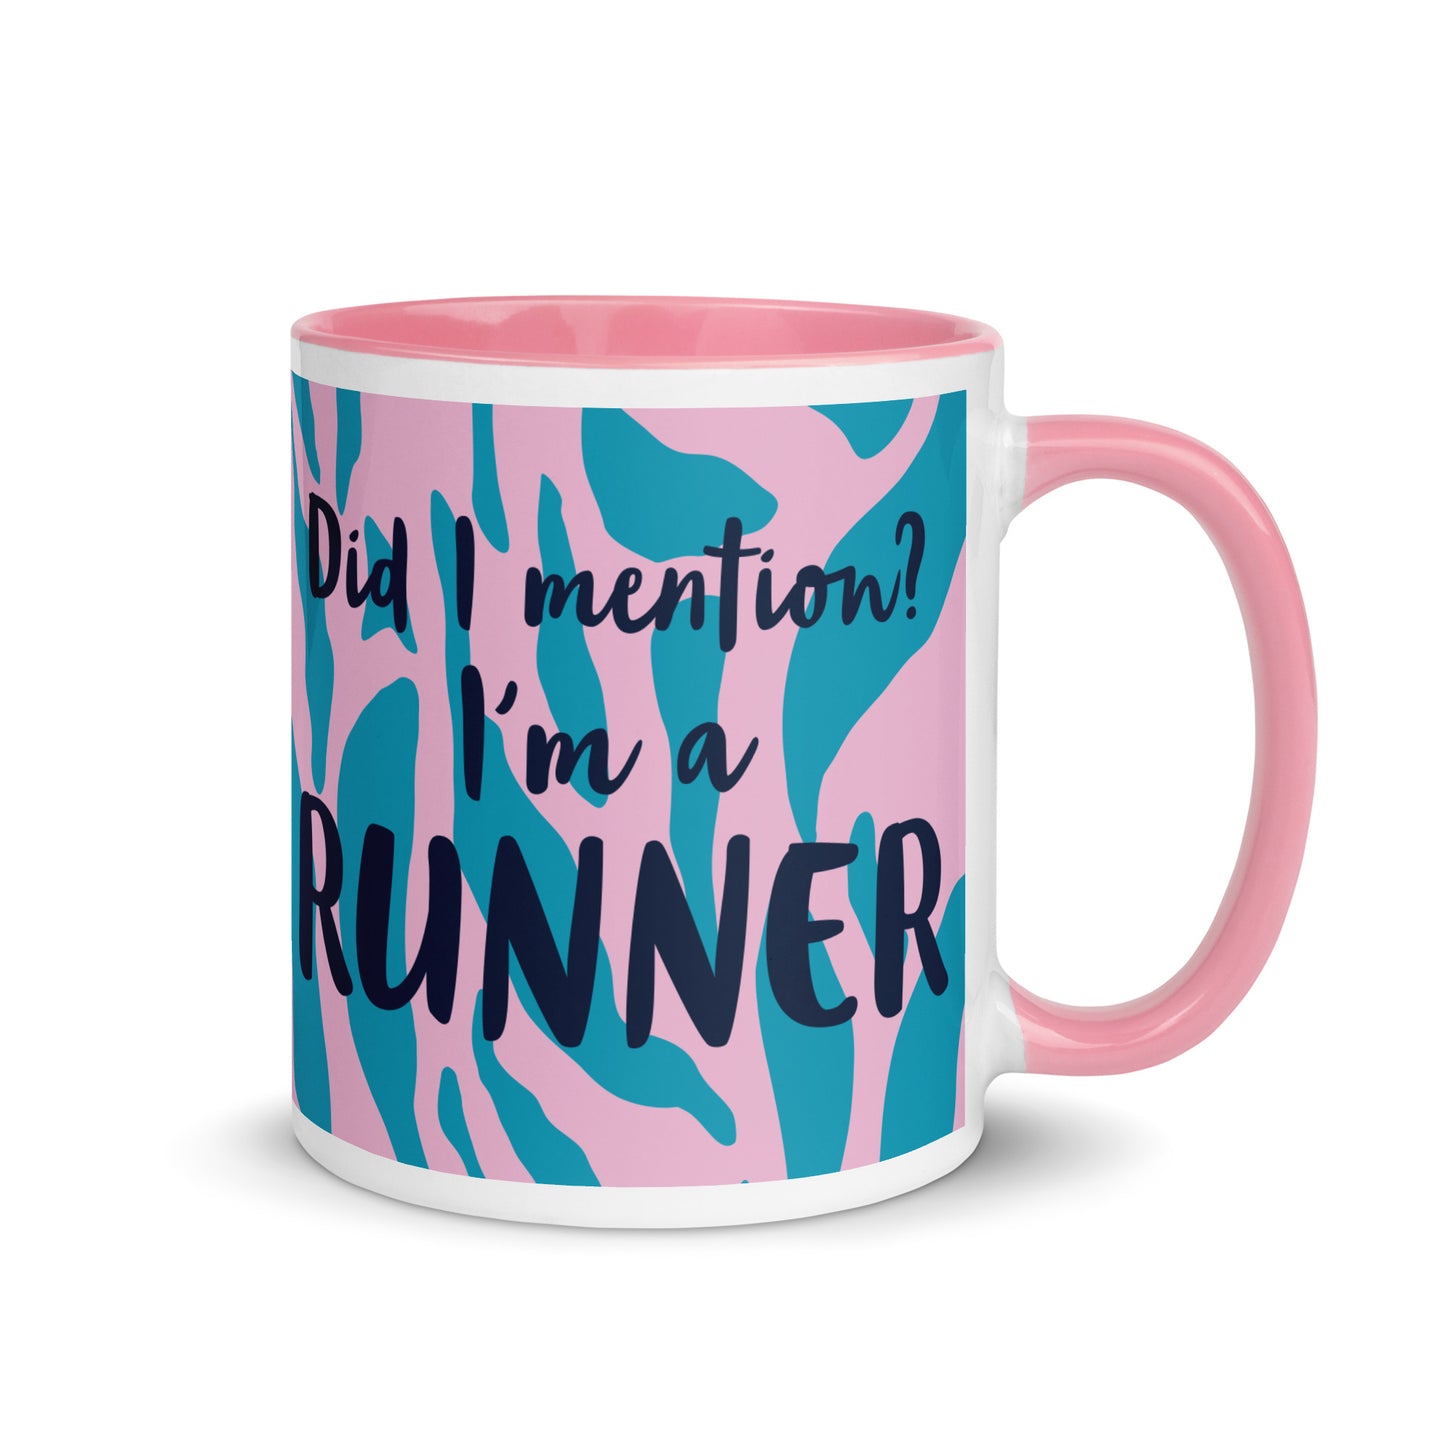 Mug with pink handle and a blue and pink leopard print design with the phrase did I mention? I'm a runner across the front. A nice gift for a running friend. 